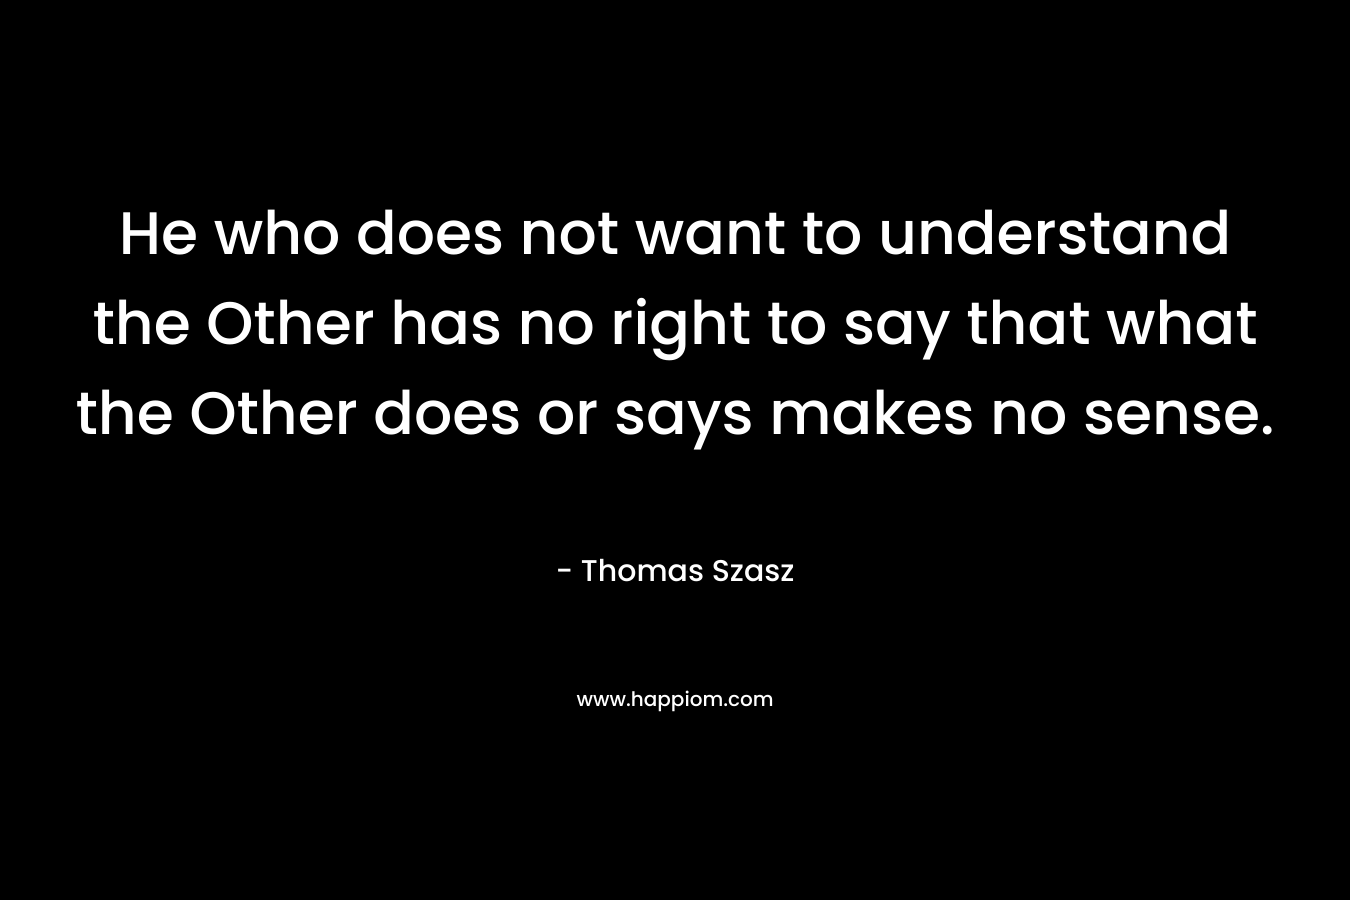 He who does not want to understand the Other has no right to say that what the Other does or says makes no sense.